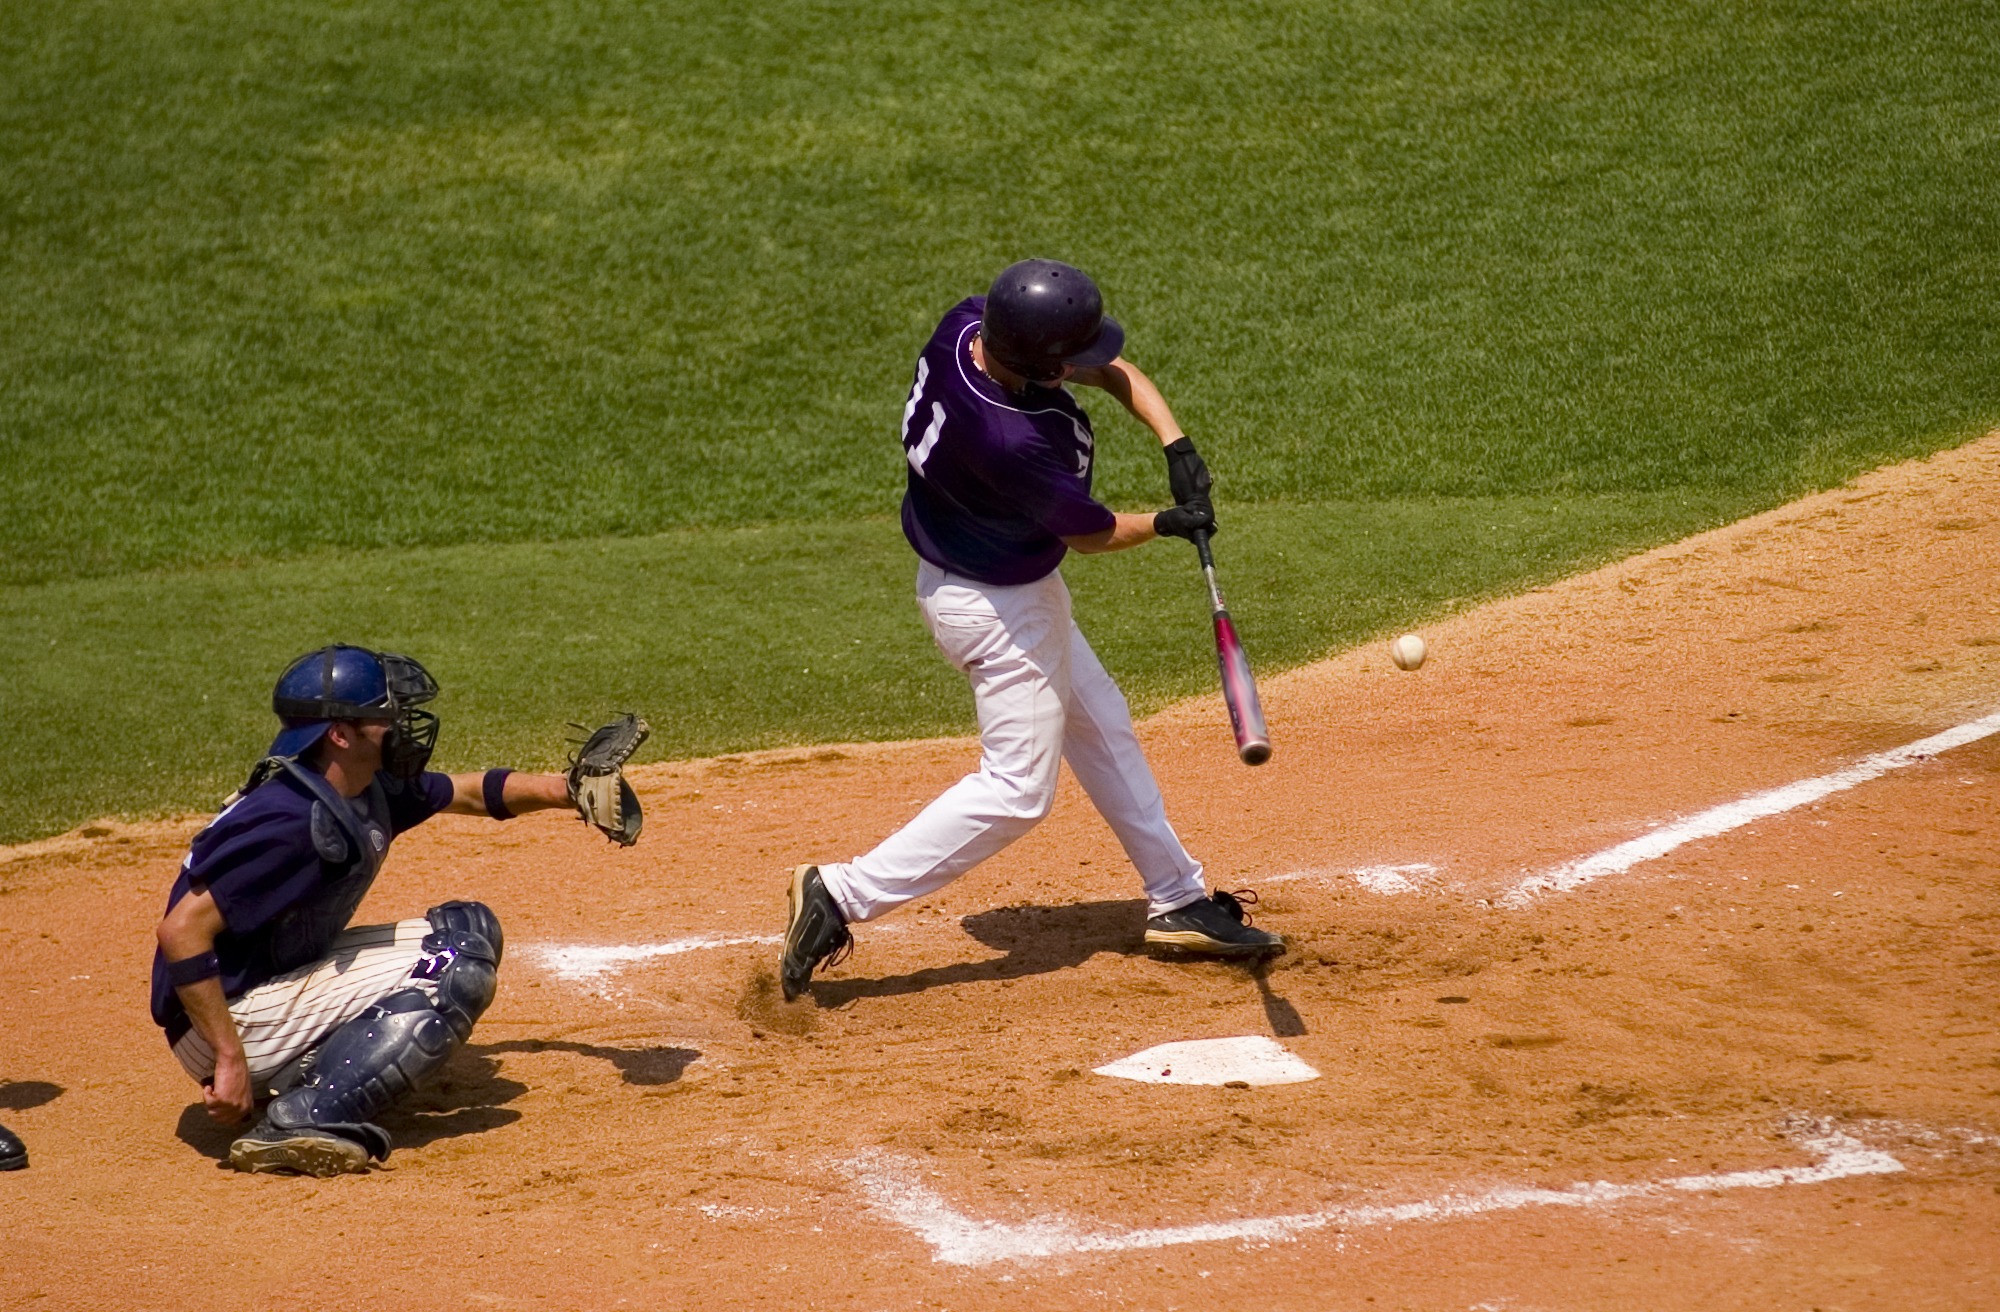 A batter hitting a pitched ball